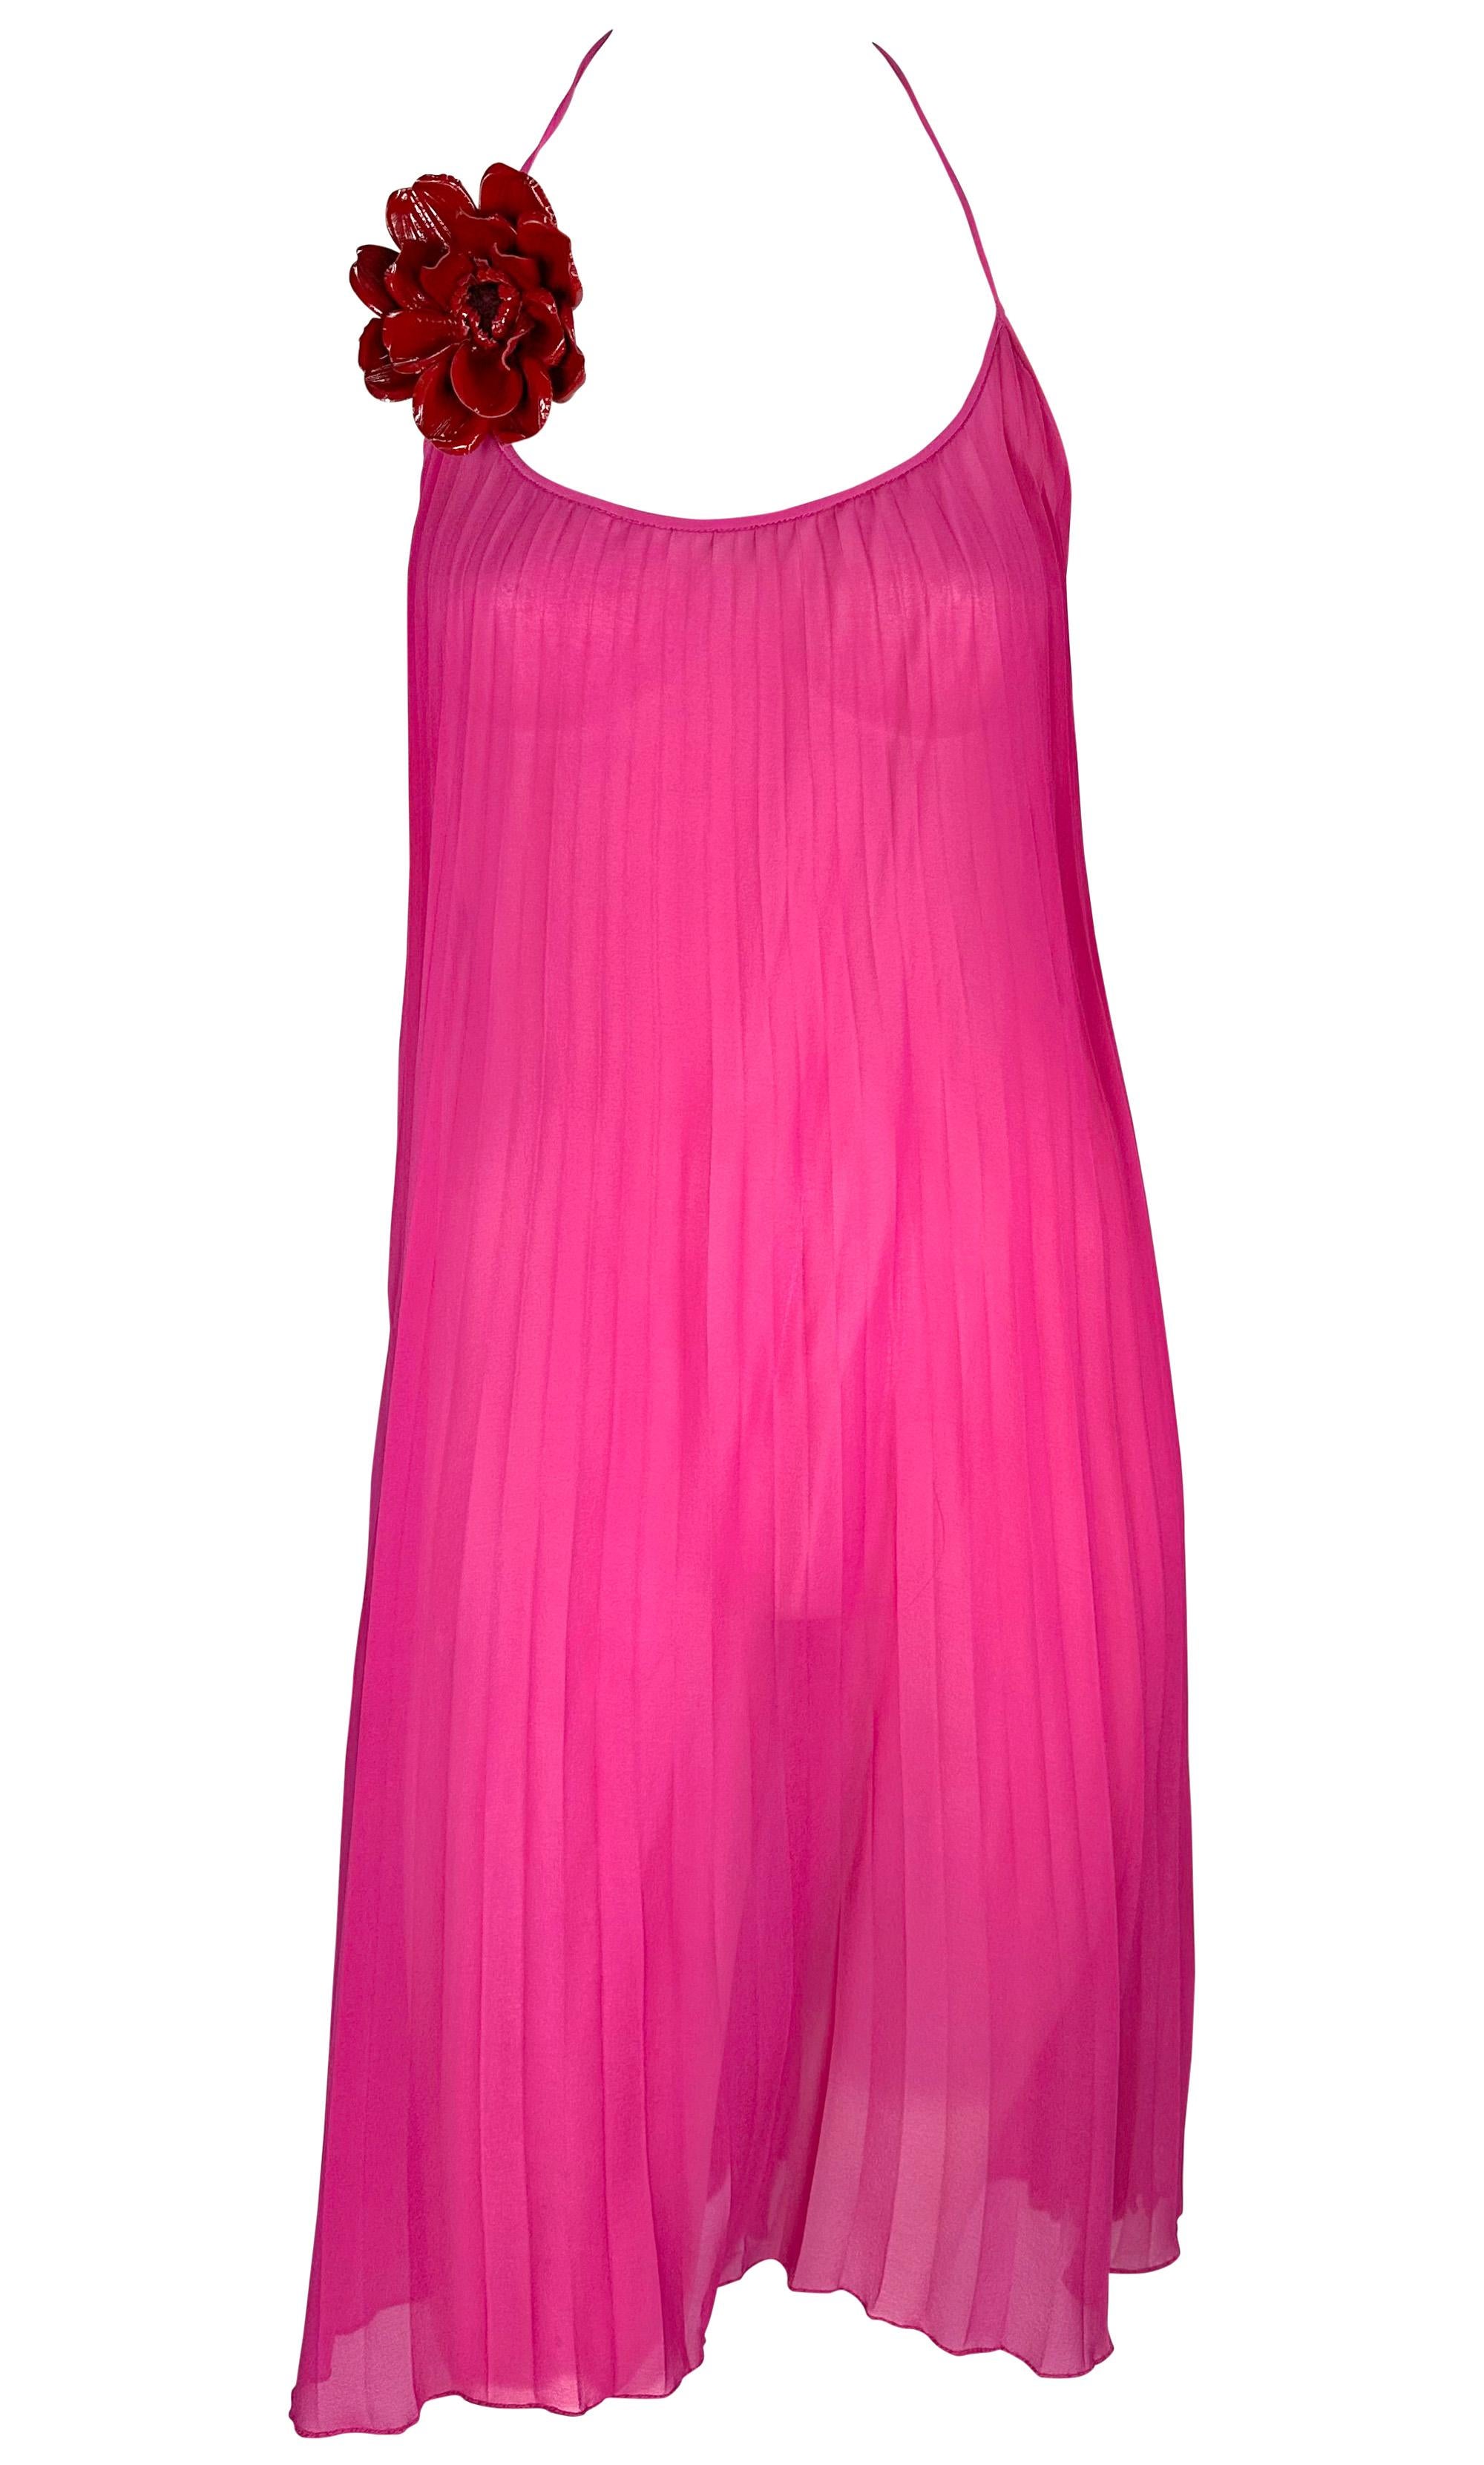 F/W 2000 Dolce & Gabbana Sheer Hot Pink Pleated Chiffon Floral Appliqué Dress For Sale 6